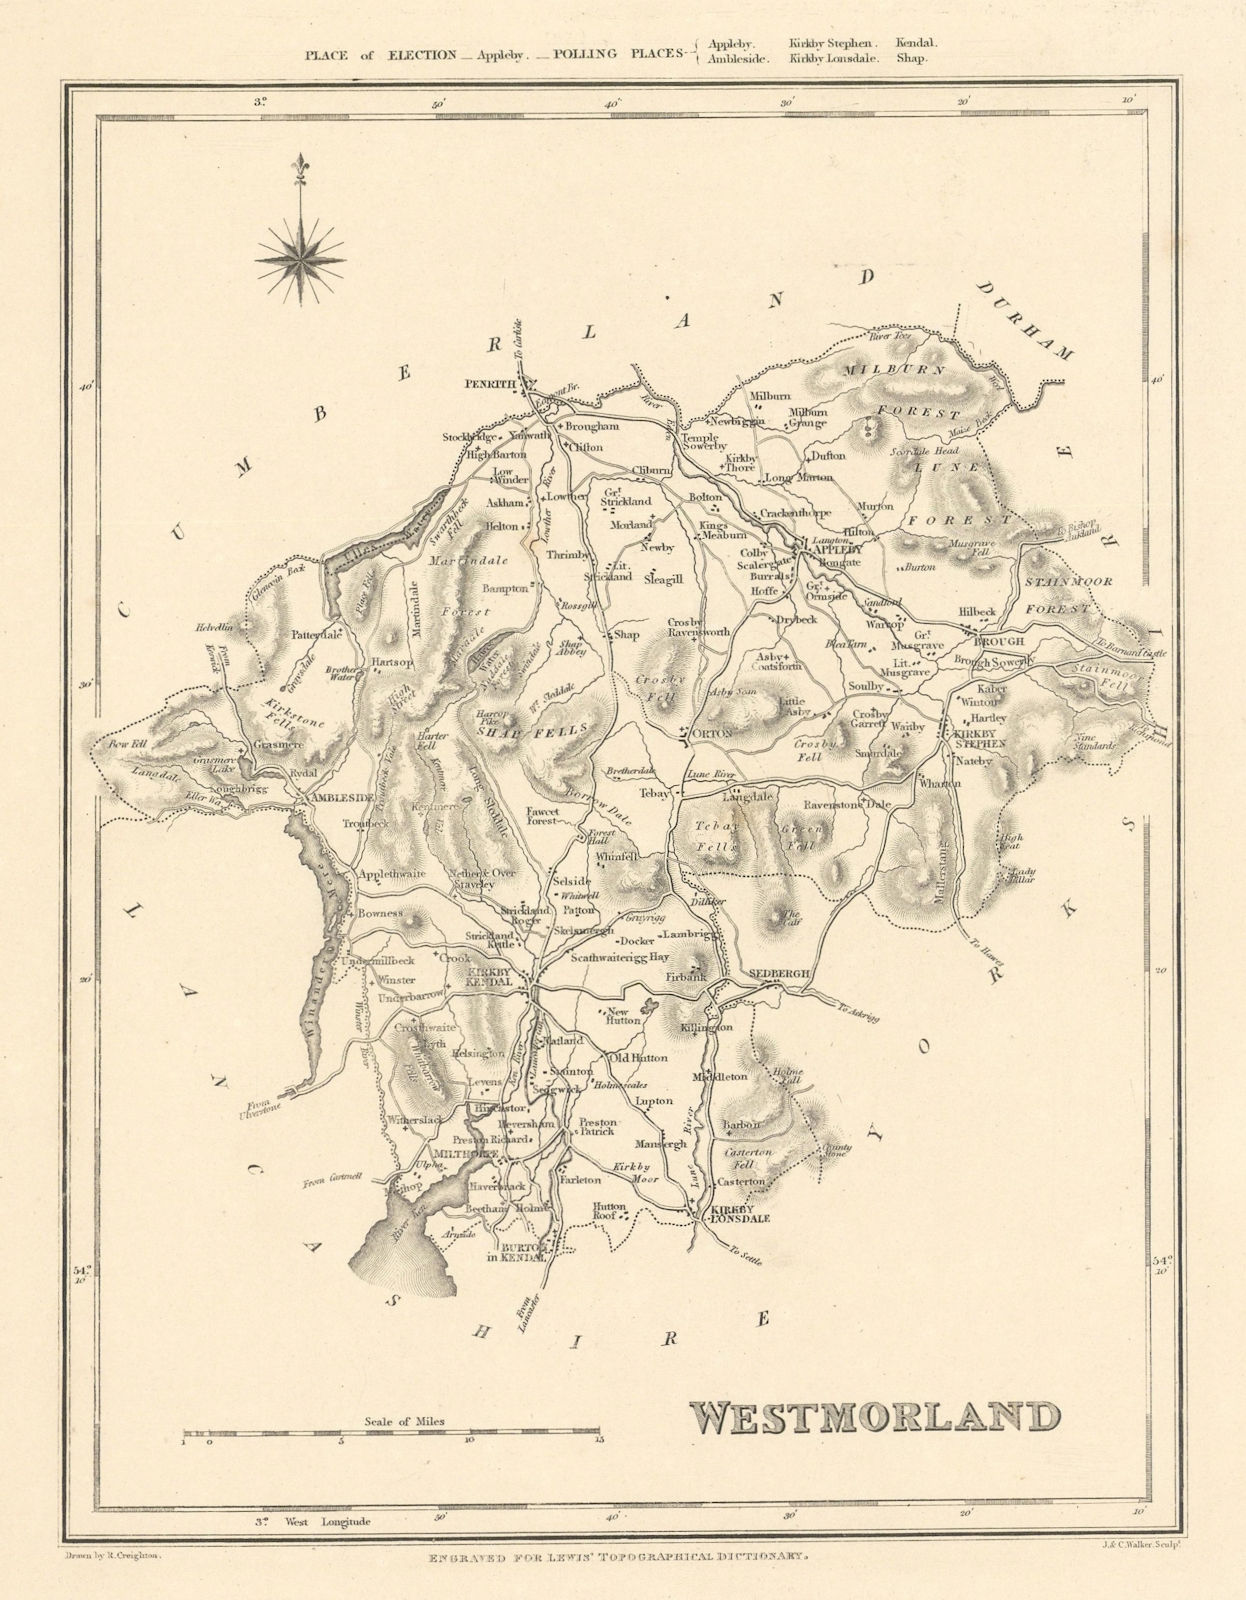 Antique county map of WESTMORLAND by Walker Creighton Lewis. Lake District c1840